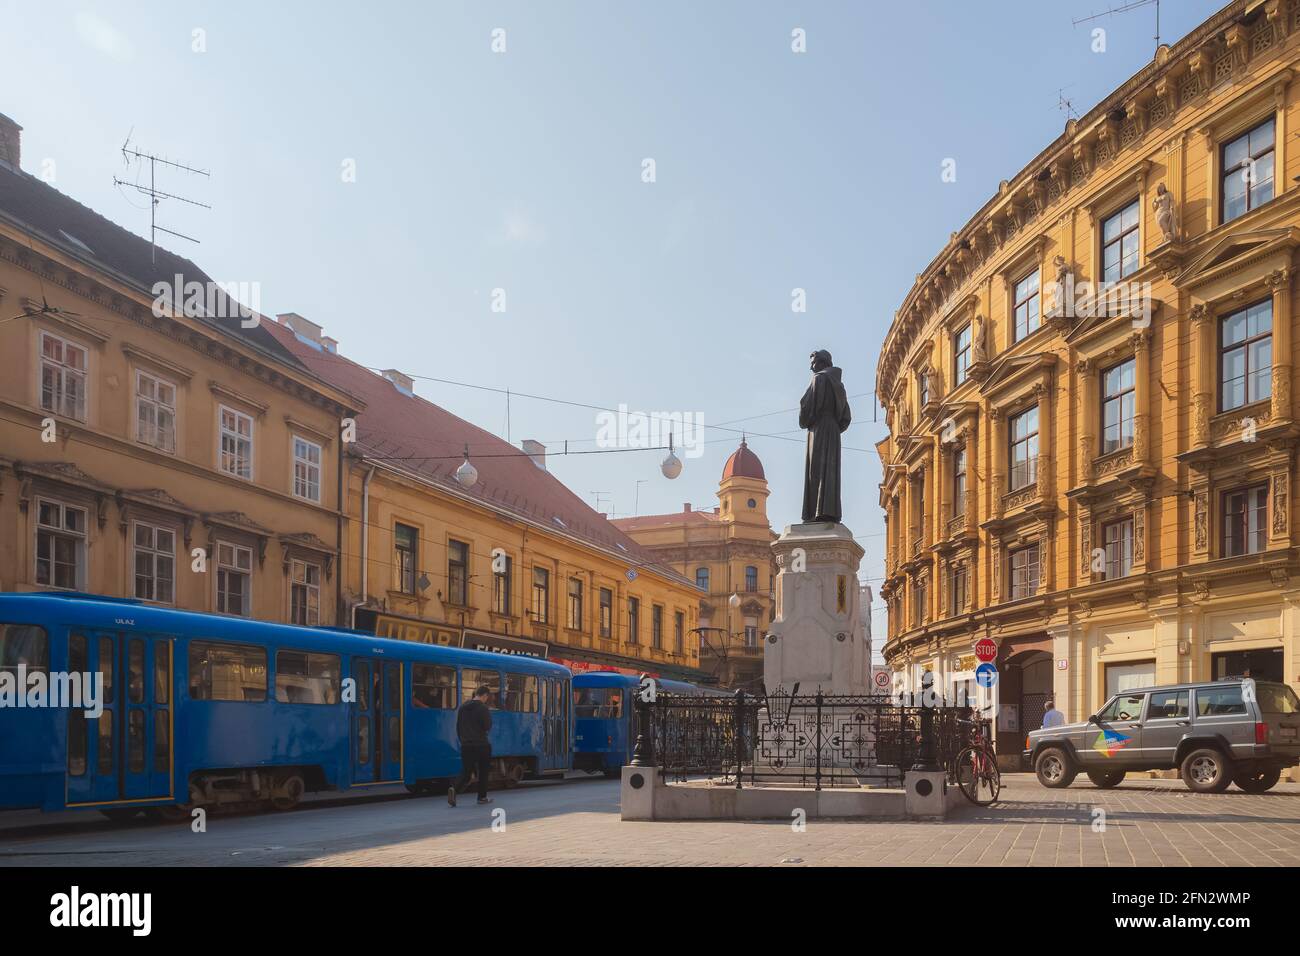 Zagreb, Croatia - October 7 2014: A tram and historic statue of poet Andrija Kacic on Ilica street in old town city centre of downtown Zagreb, capital Stock Photo